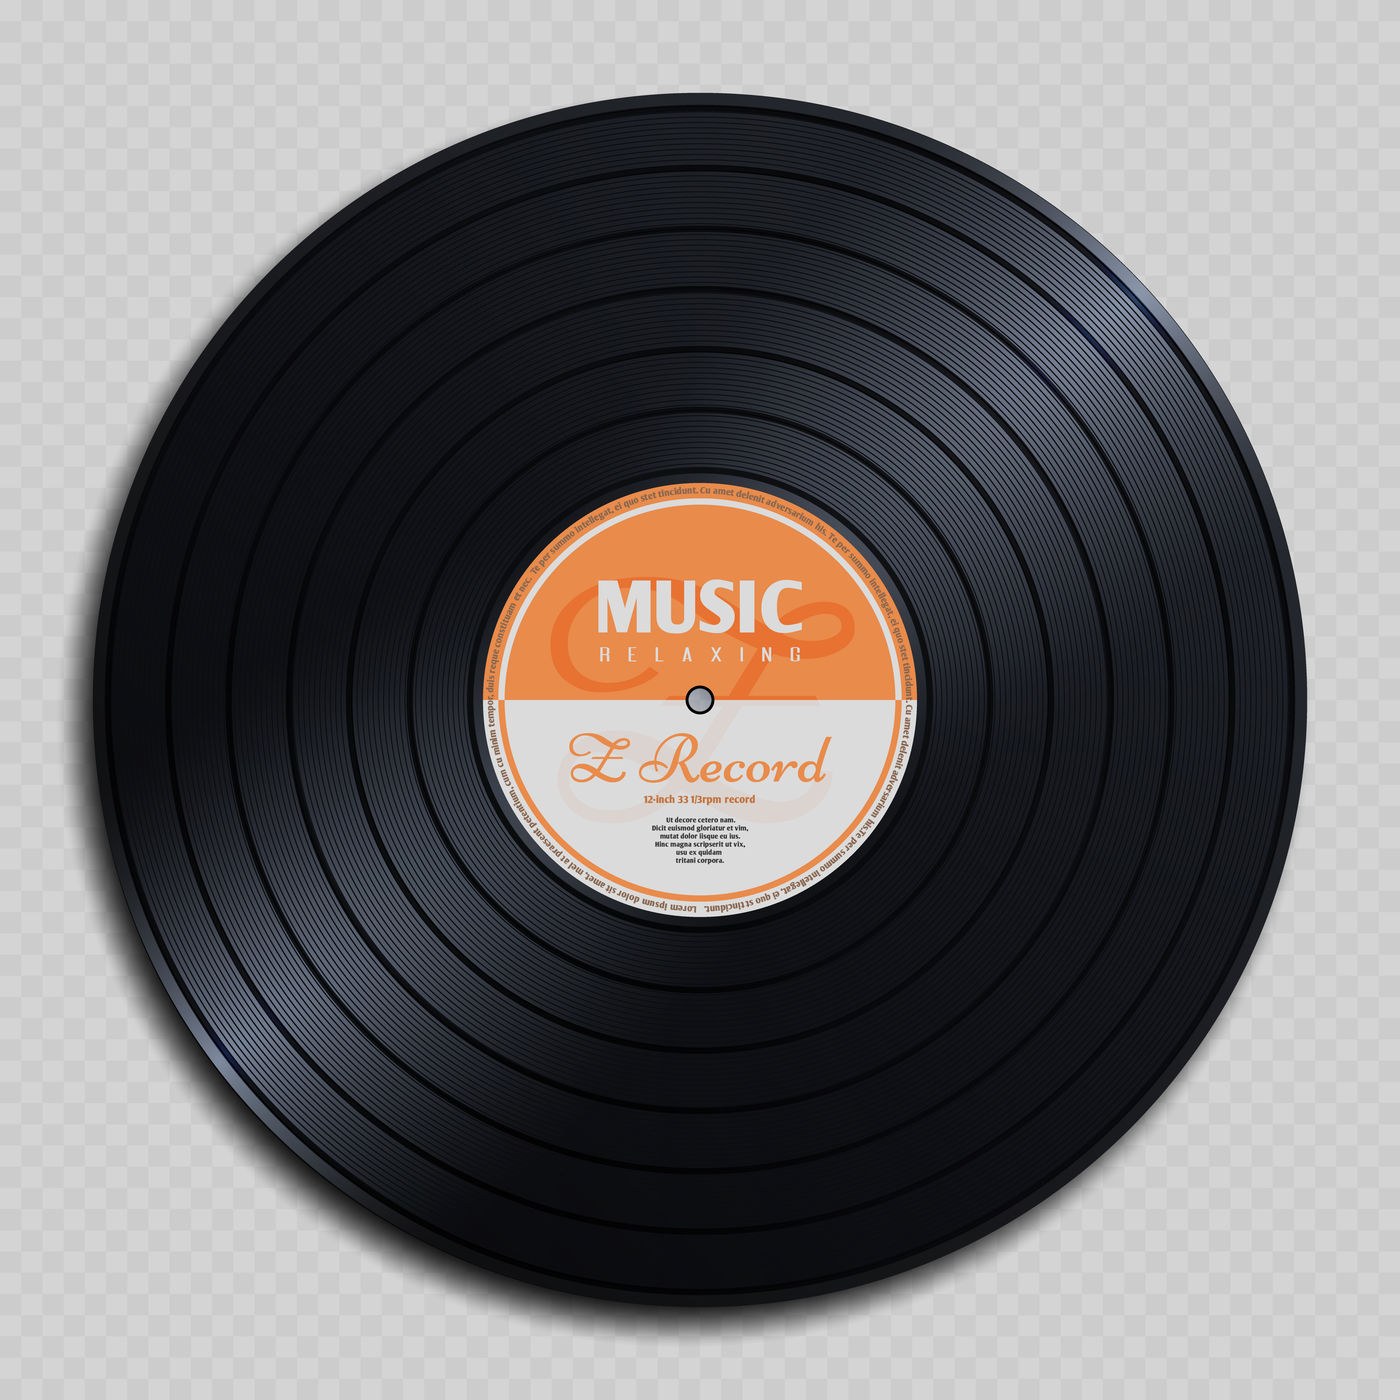 Audio analogue record vinyl vintage disc isolated on transparent backg By  Microvector